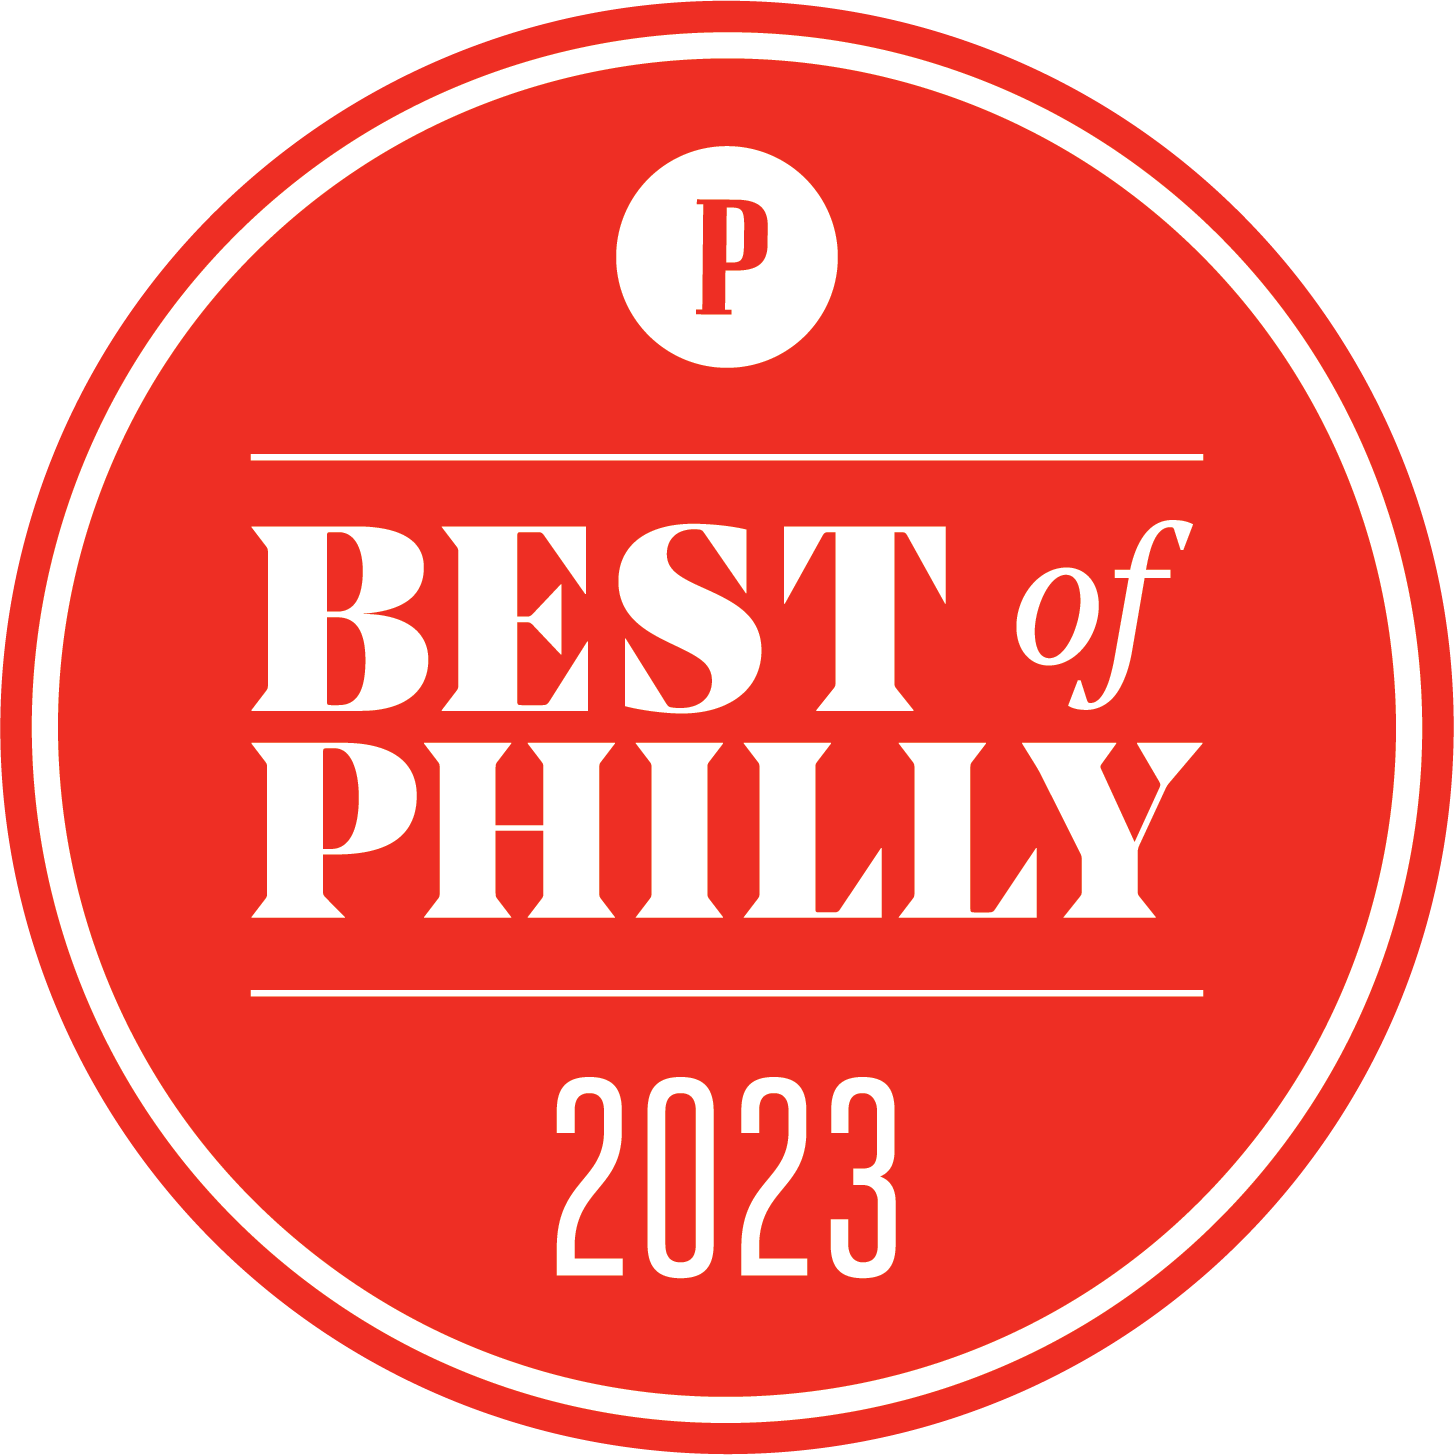 BEST OF PHILLY 2023: Best Place to Go After a Long Week